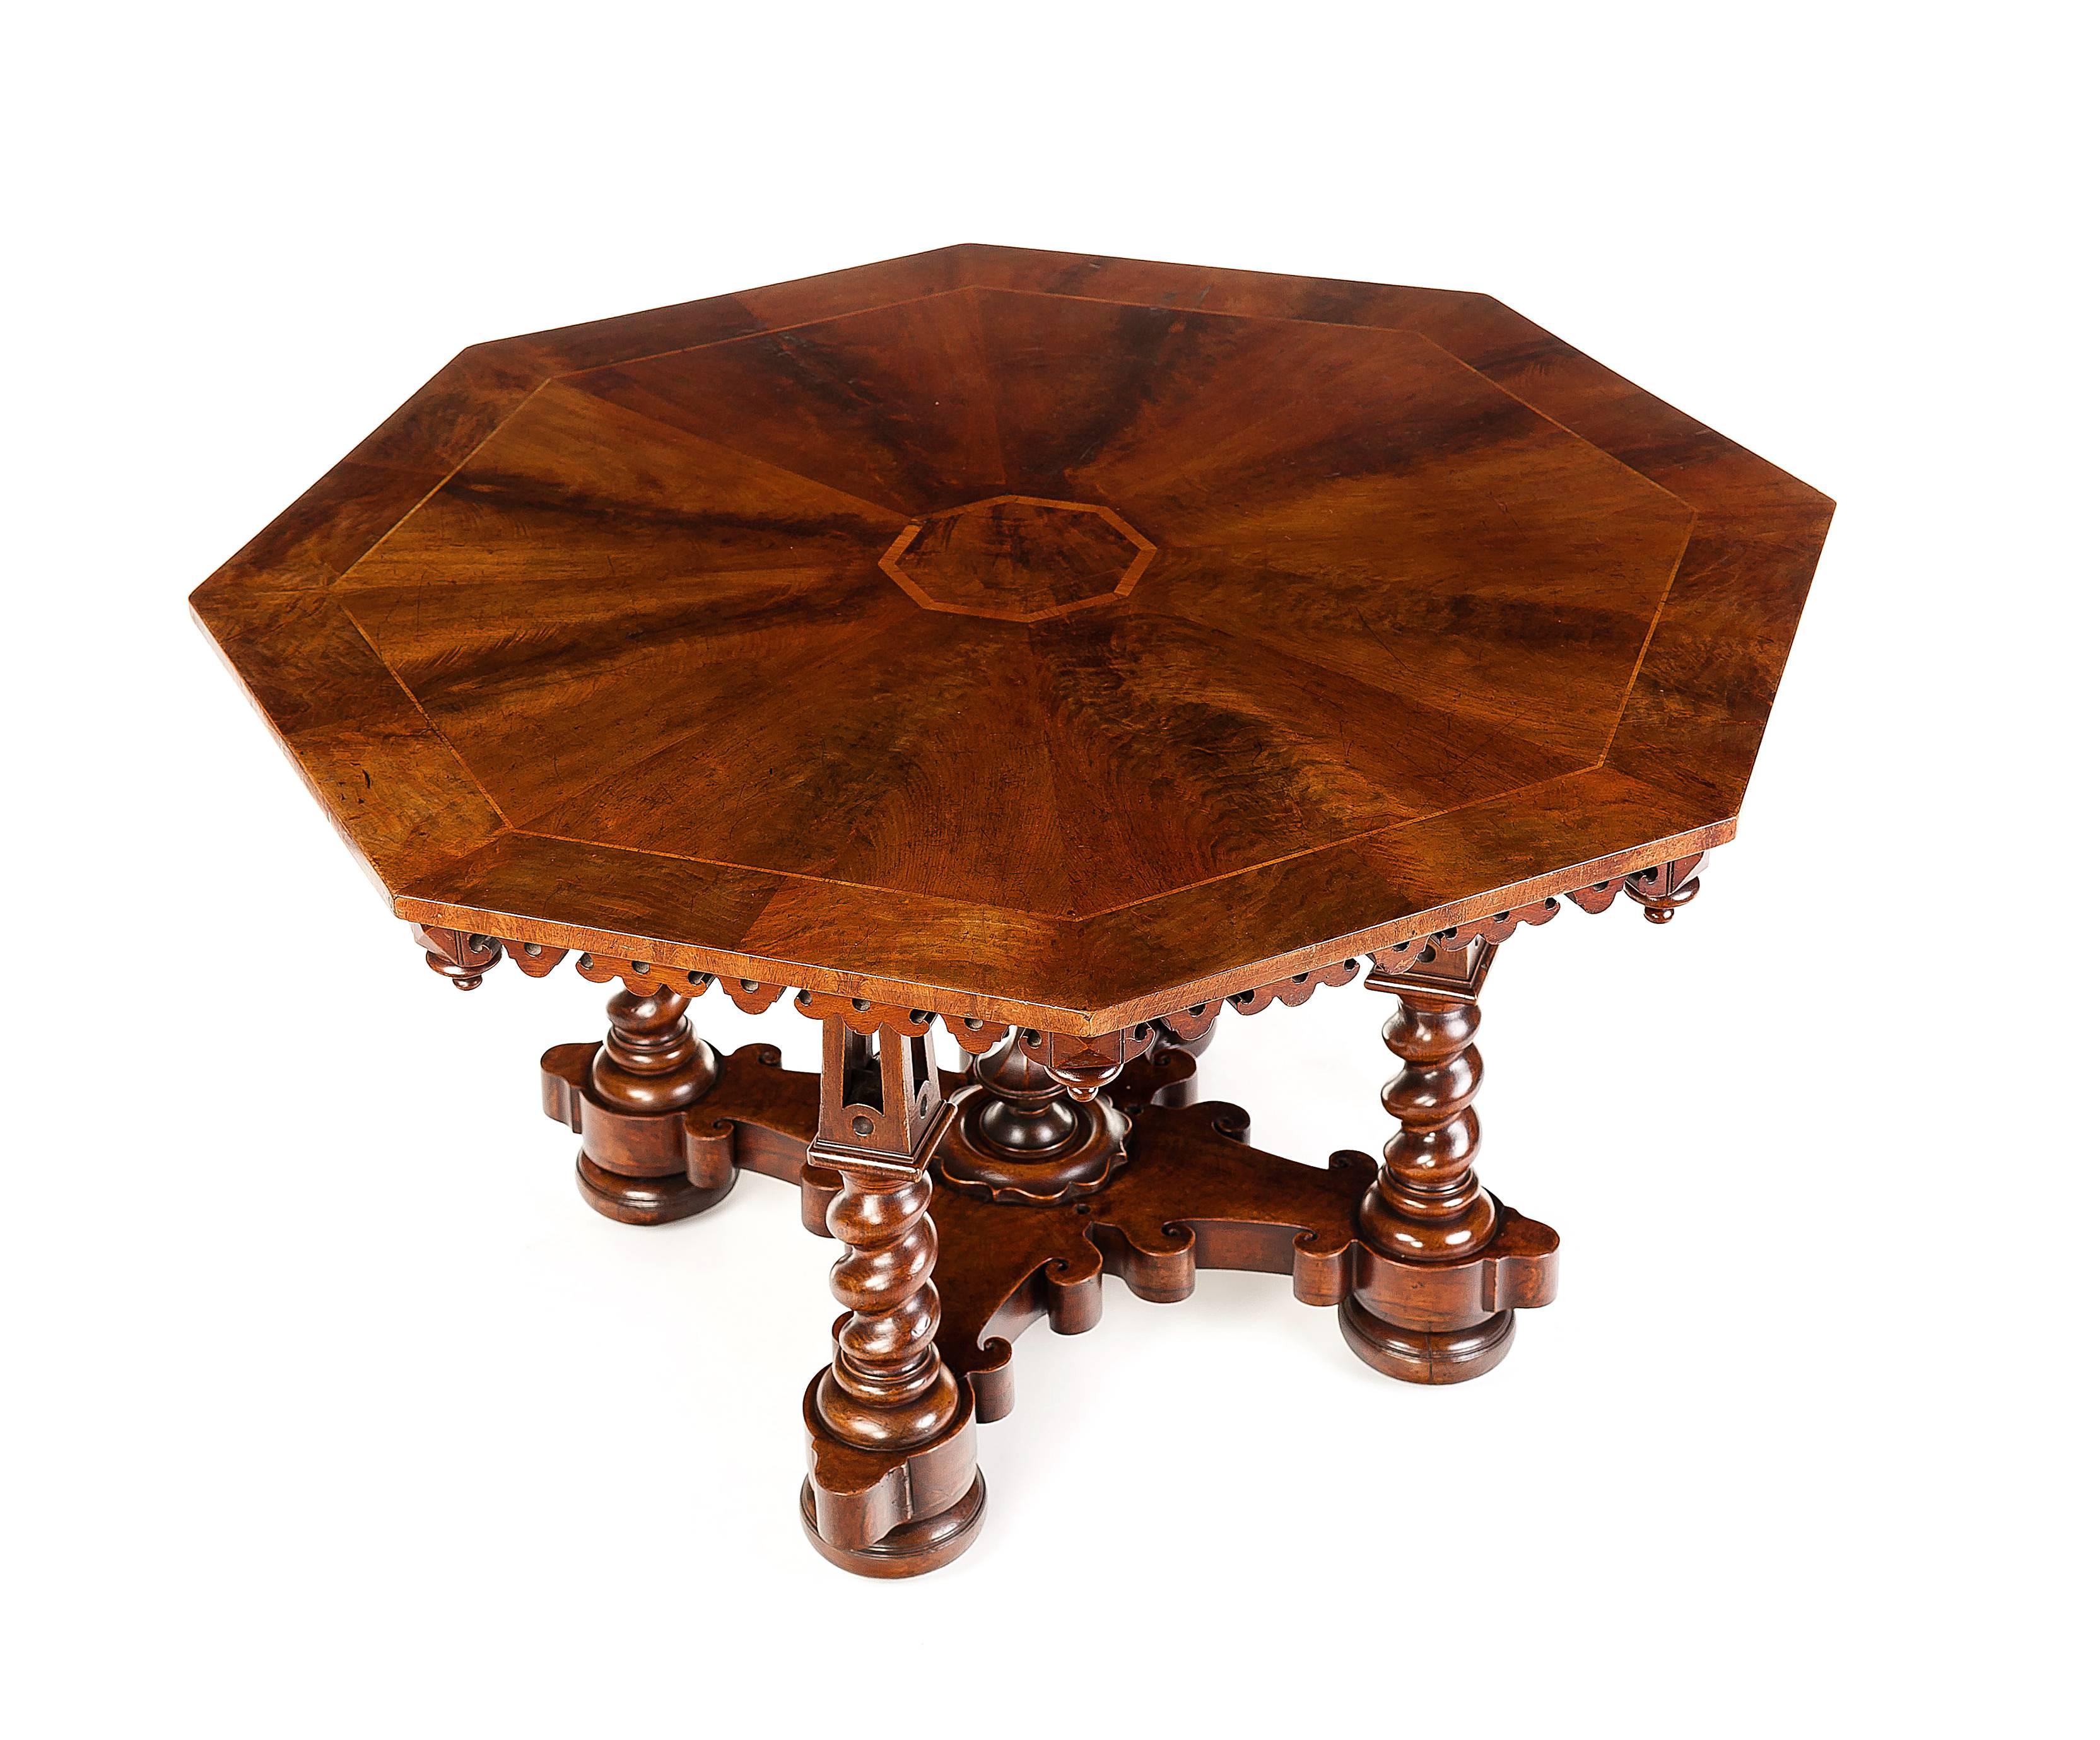 An early Victorian walnut and ash banded centre table attributed to Thomas Willement (1786-1871), the banded top with a central octagonal medallion and a pierced scroll work pendant frieze on four pieced spire and twist supports and a scrolling